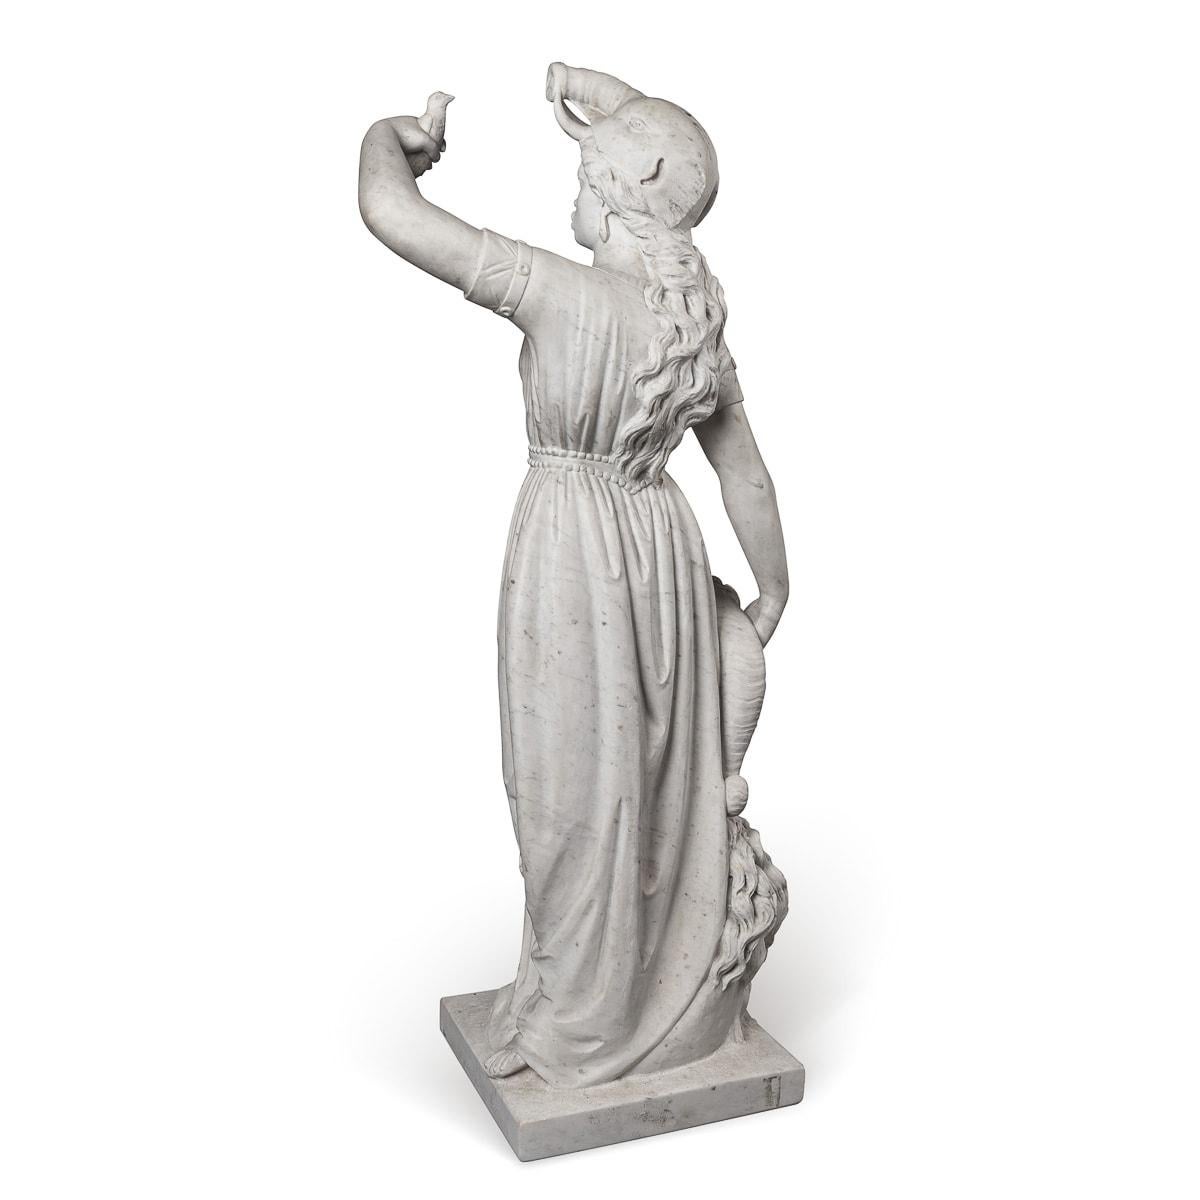 Crafted in the mid-19th century, this antique Italian marble sculpture portrays a graceful African lady draped in robes. Crowned with an elephant head, she delicately holds up a small bird in one hand, while the other hand rests beside her leg,